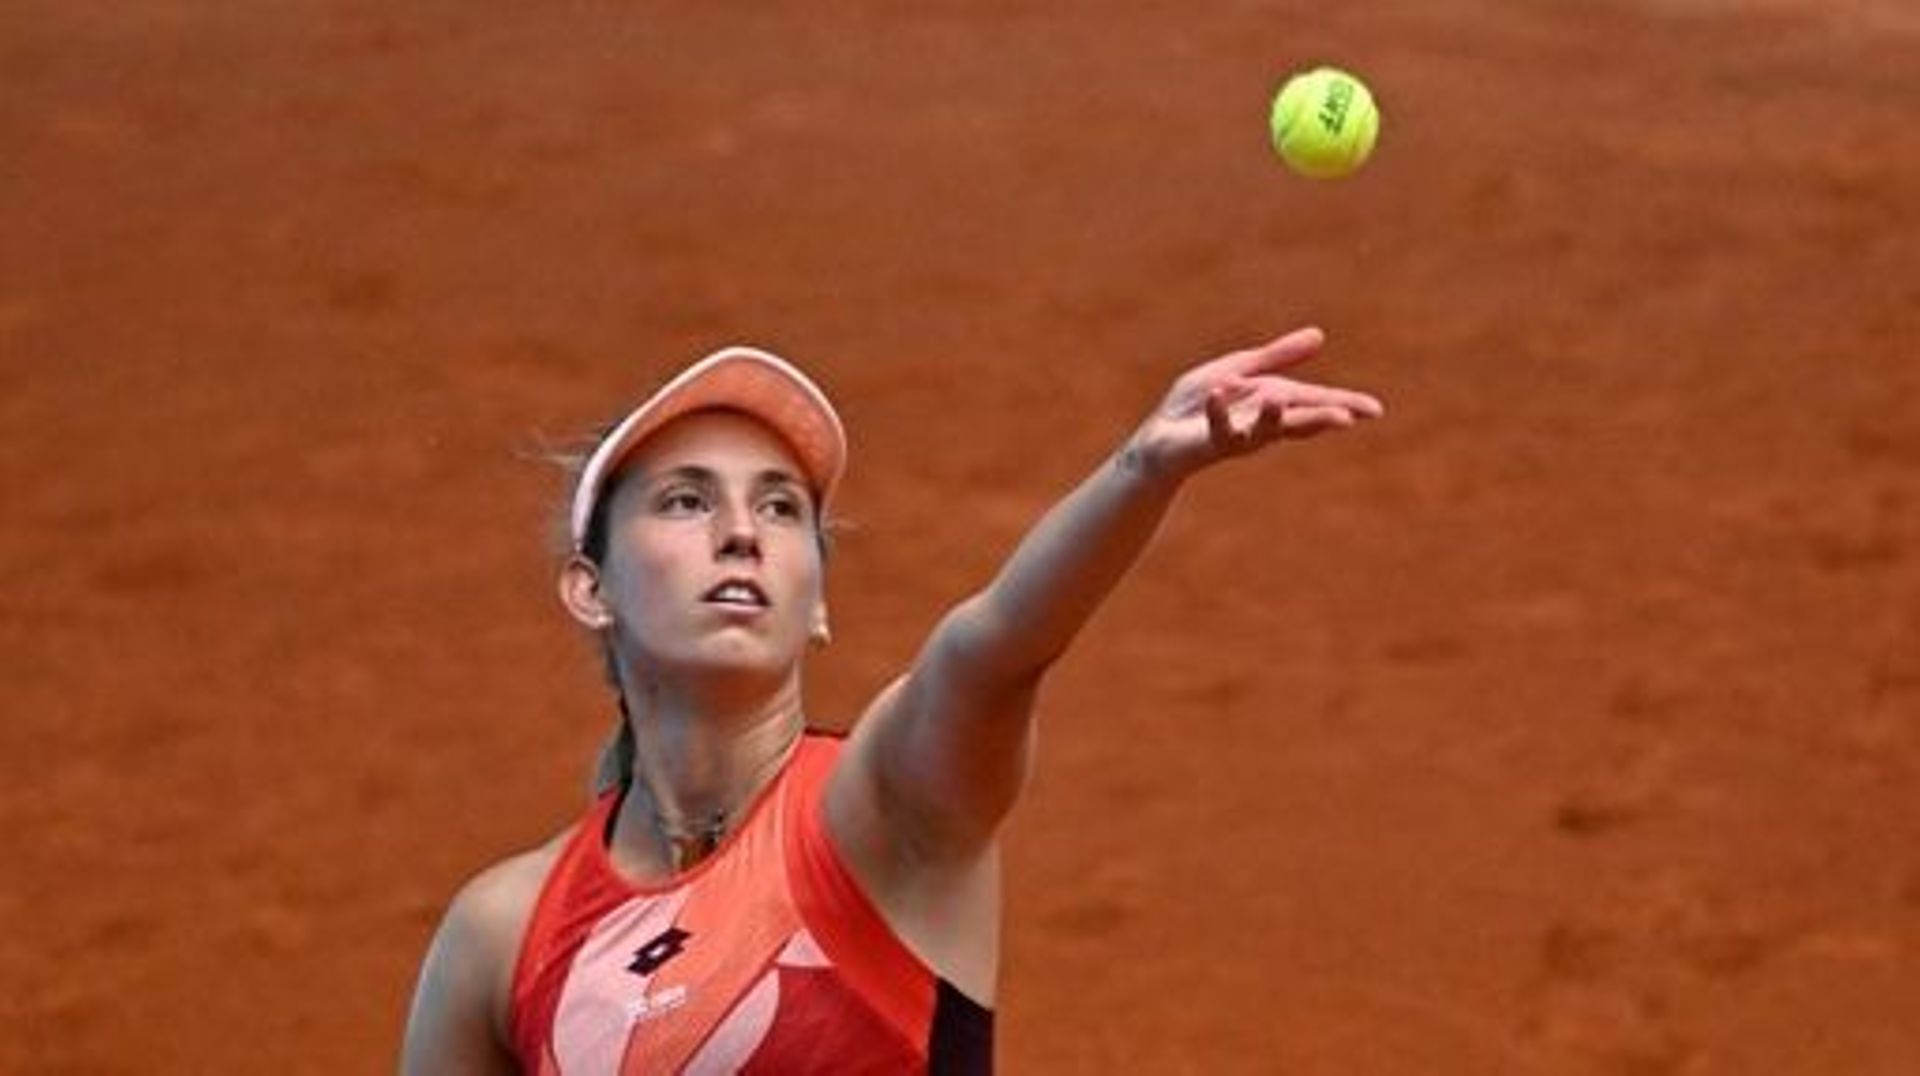 Belgium's Elise Mertens serves the ball to Germany's Jule Niemeier during their 2023 WTA Tour Madrid Open tennis tournament singles match at the Caja Magica in Madrid on April 29, 2023.  OSCAR DEL POZO / AFP